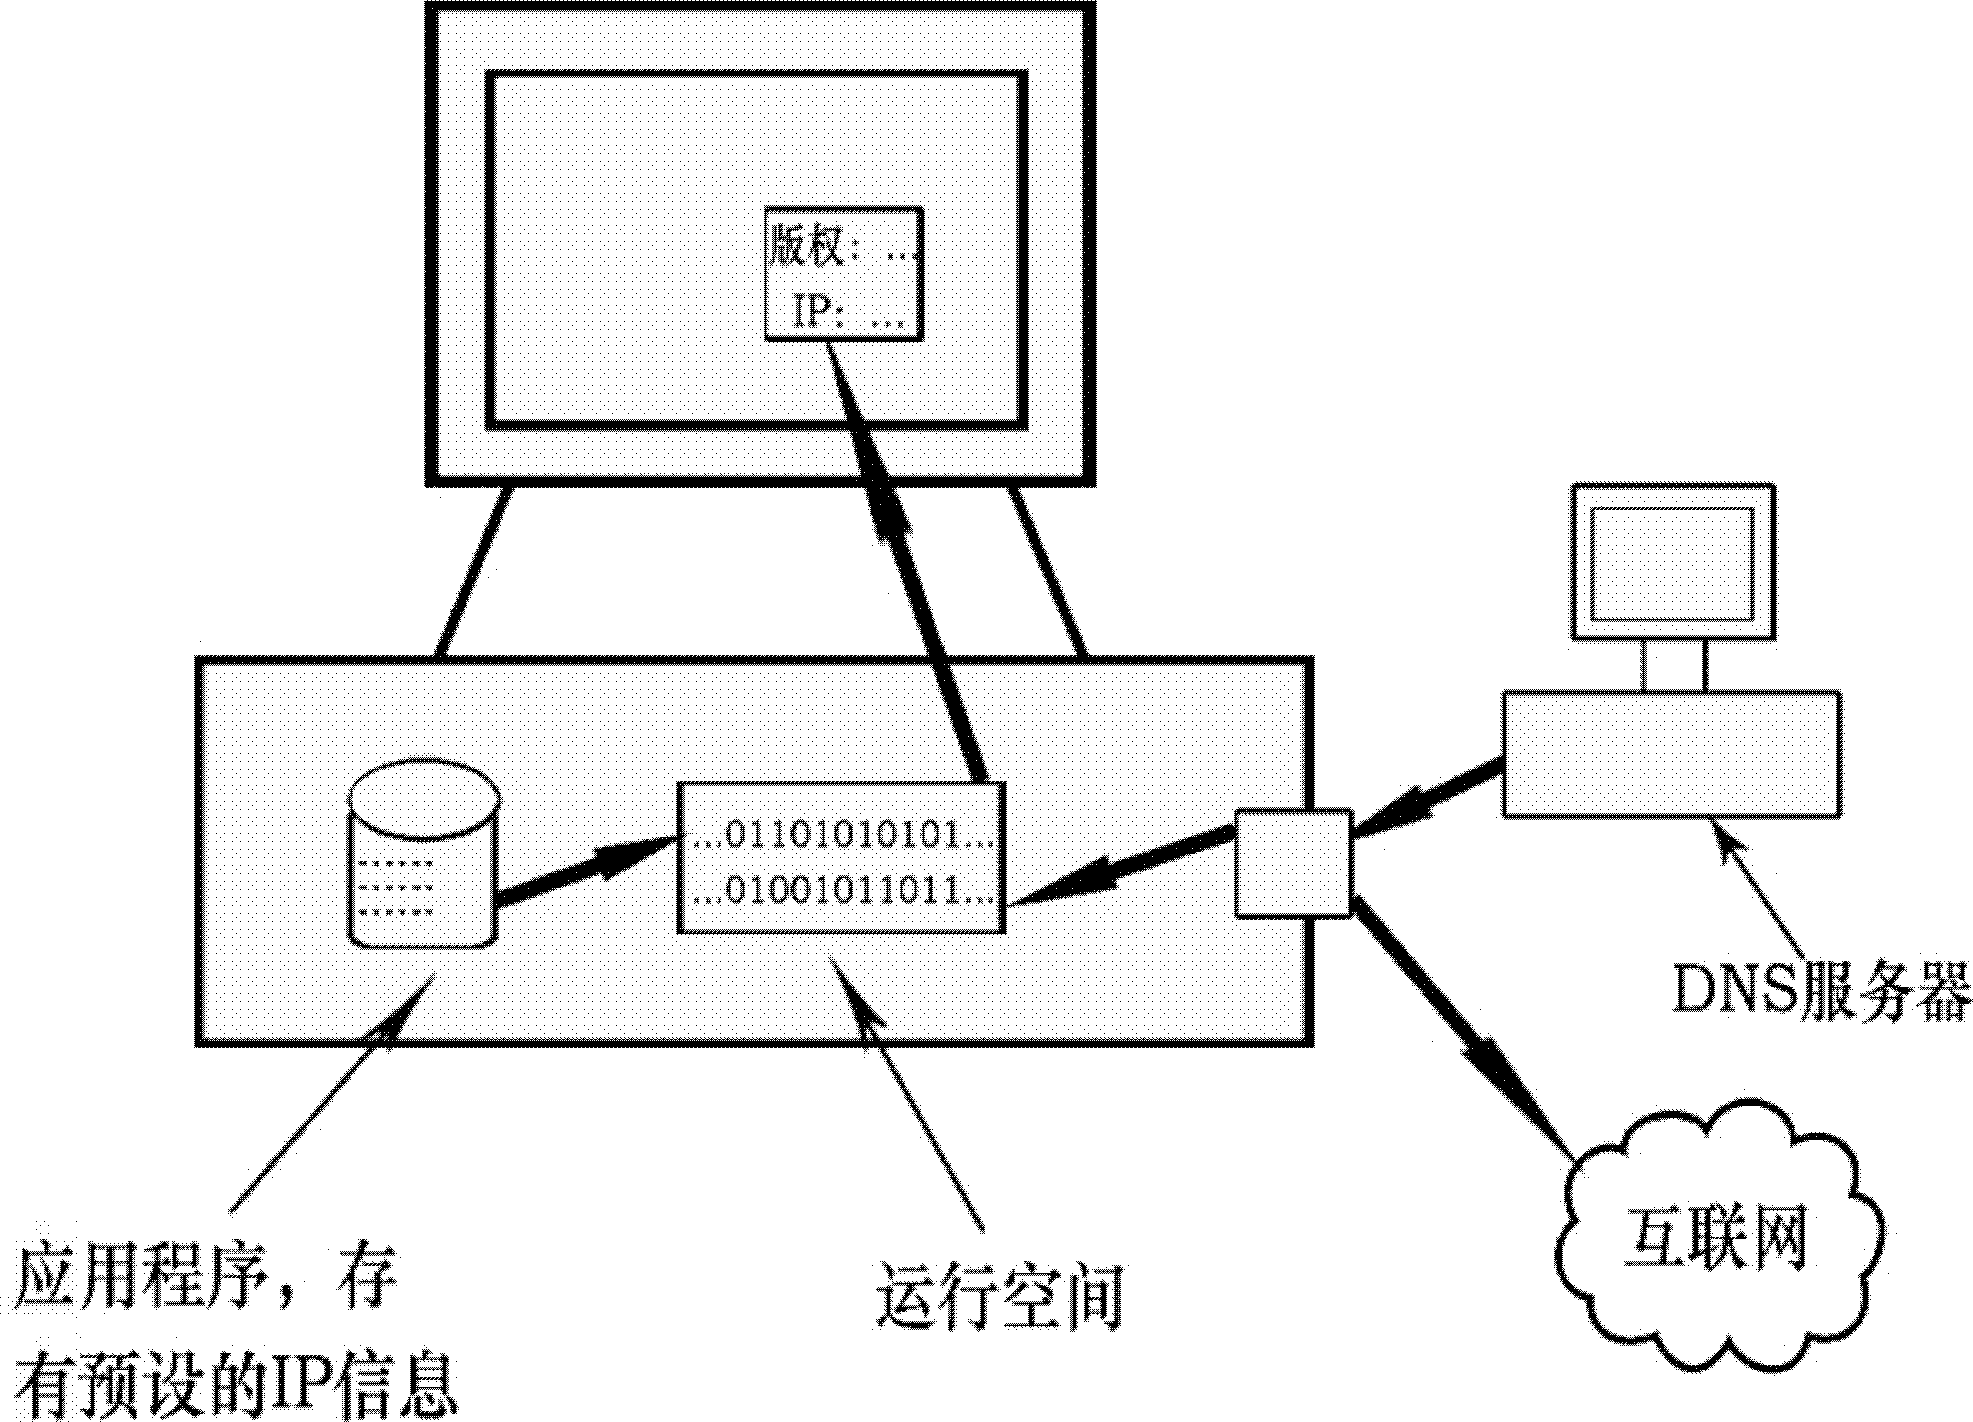 Method for protecting copyright by combining IP (Internet Protocol) address